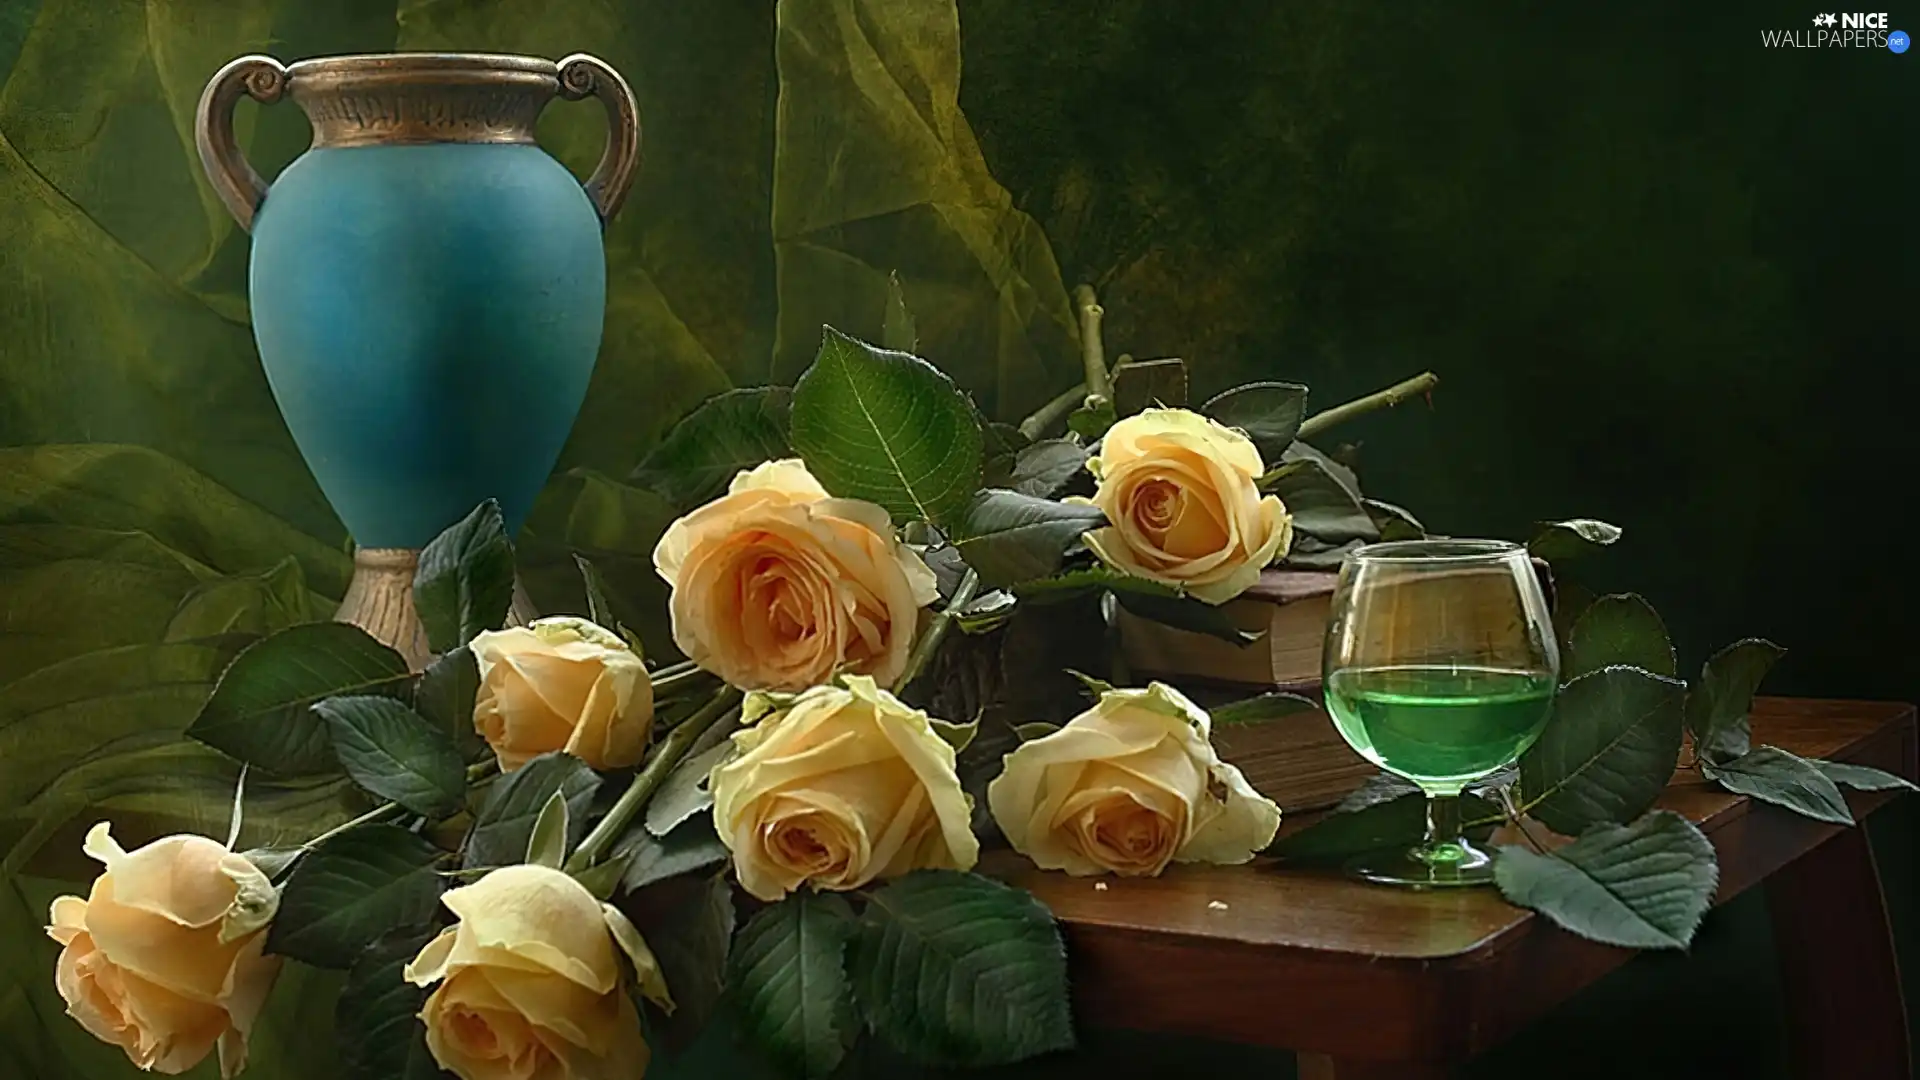 blue, roses, glass, pitcher